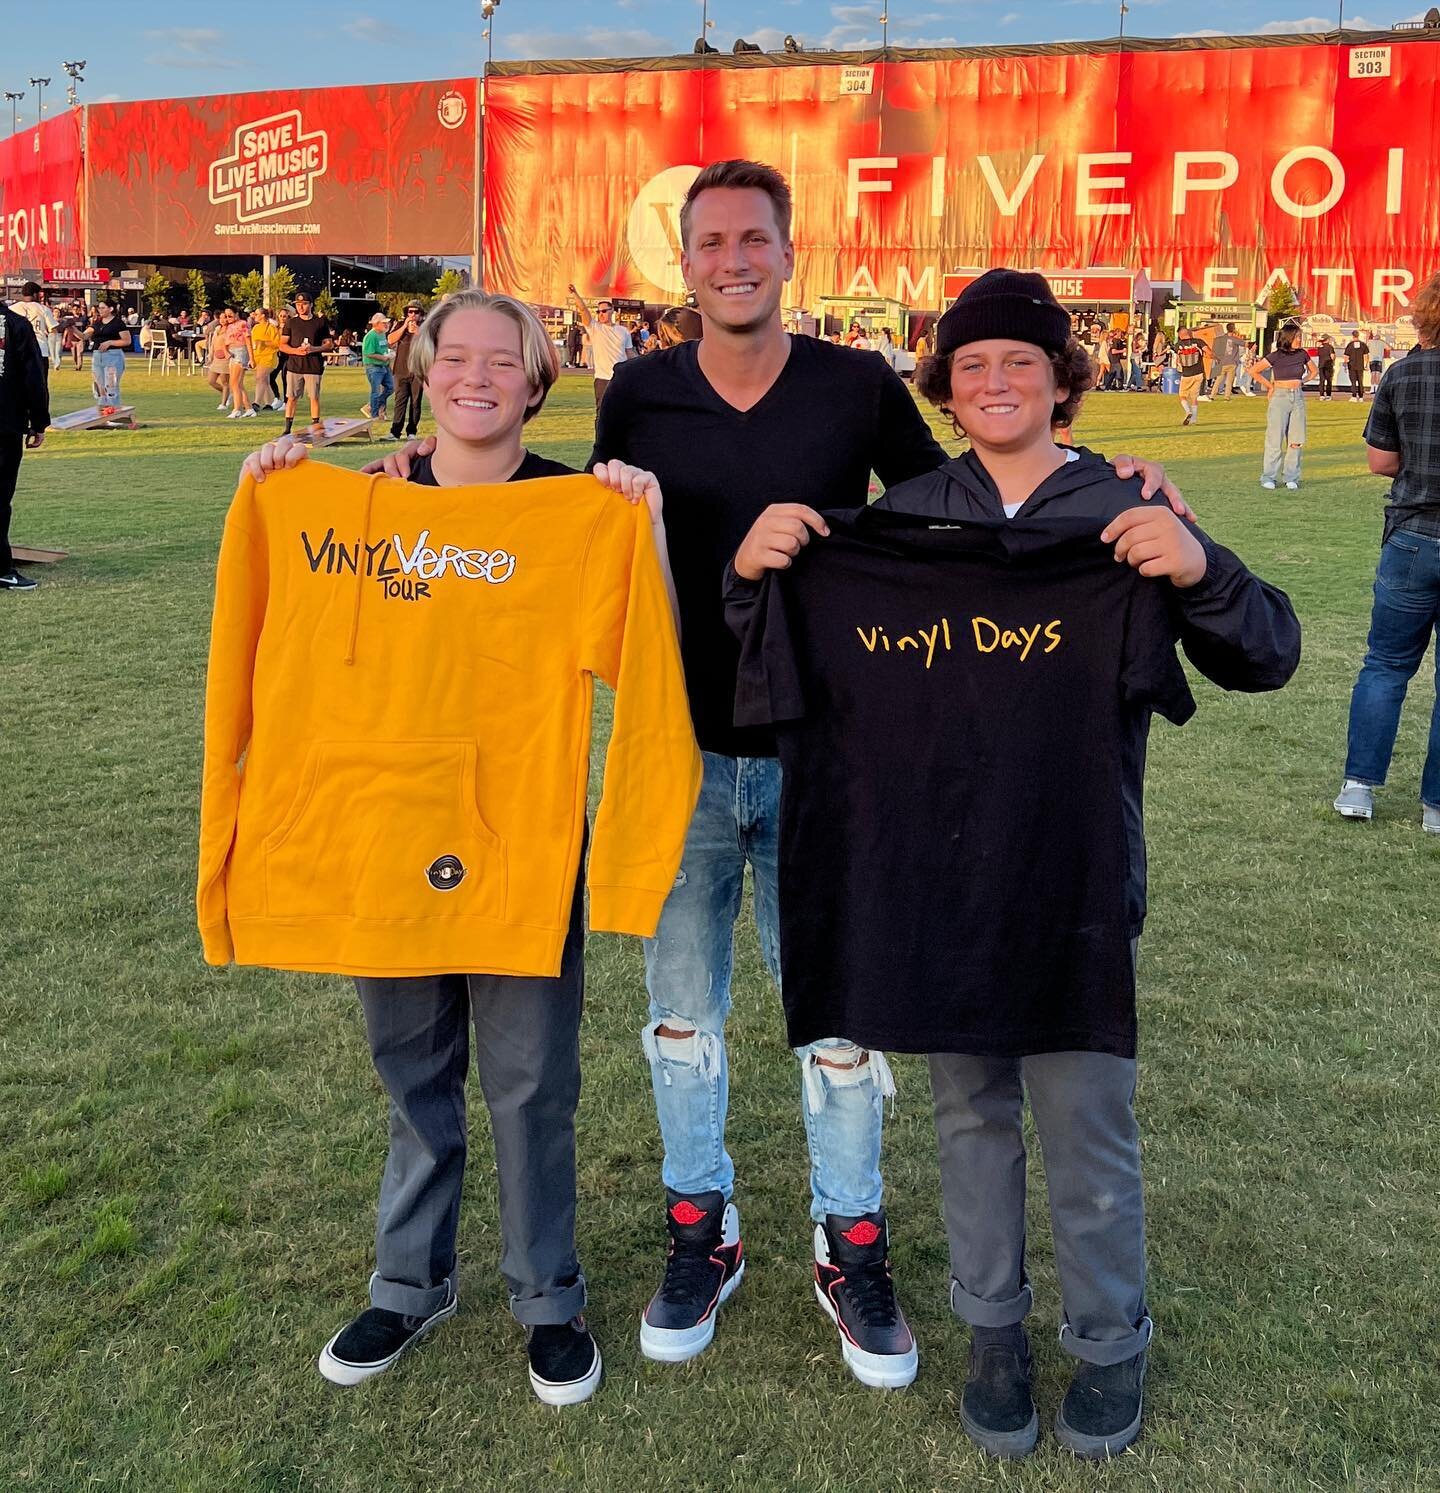 Baily, Corbin, Macy, Jaden &amp; Kenny!!! So glad we could be a part of your concert experience!
~ #peace #love &amp; #positivity ~

#theconcertedeffort #givingback #community #family #logic #wizkhalifa #concerts 
@logic @wizkhalifa @fivepointamphith